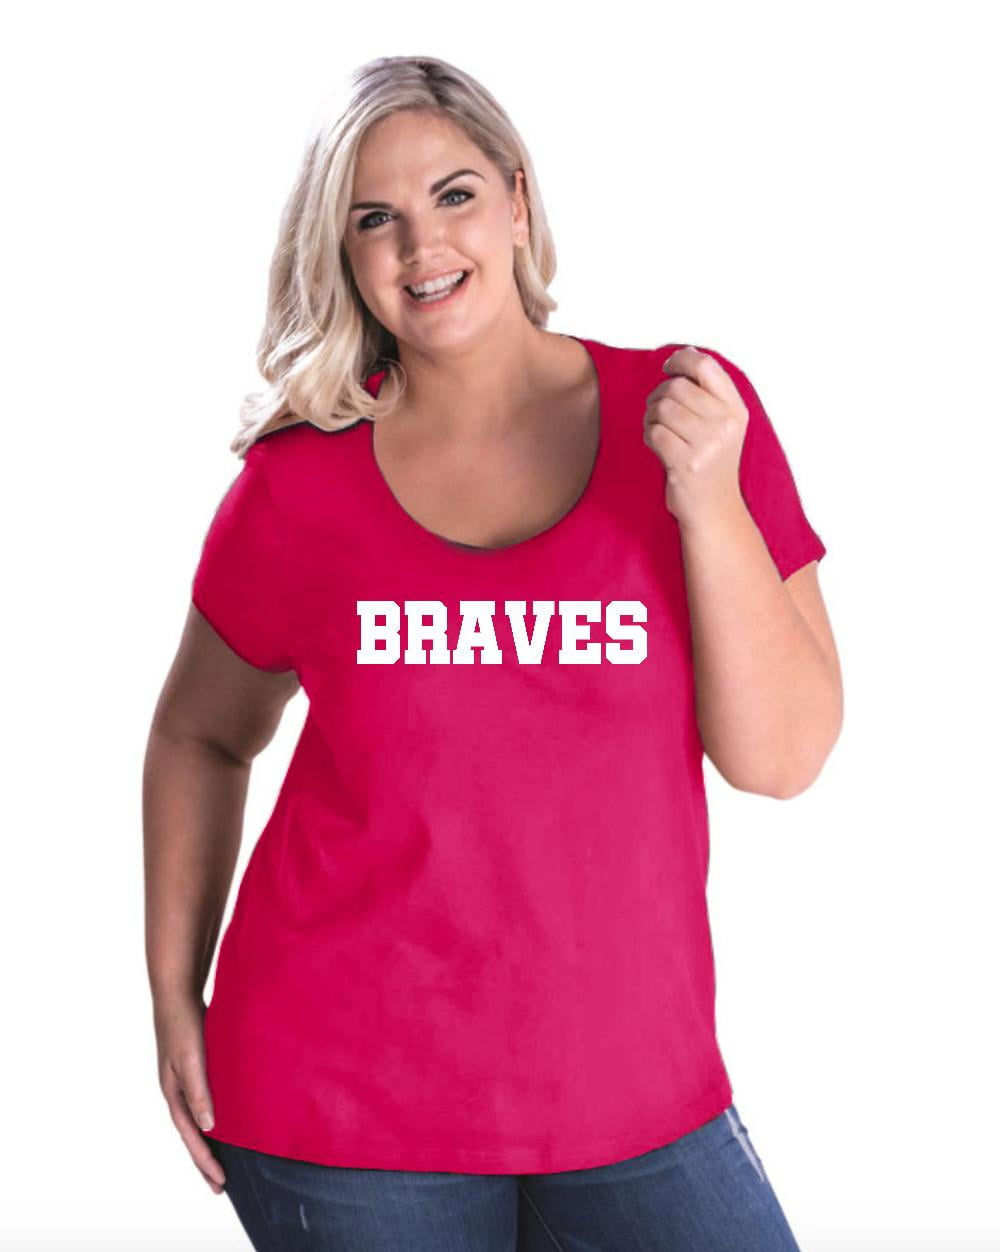 IWPF - Women's Plus Size Curvy T-Shirt, up to Size 28 - Braves